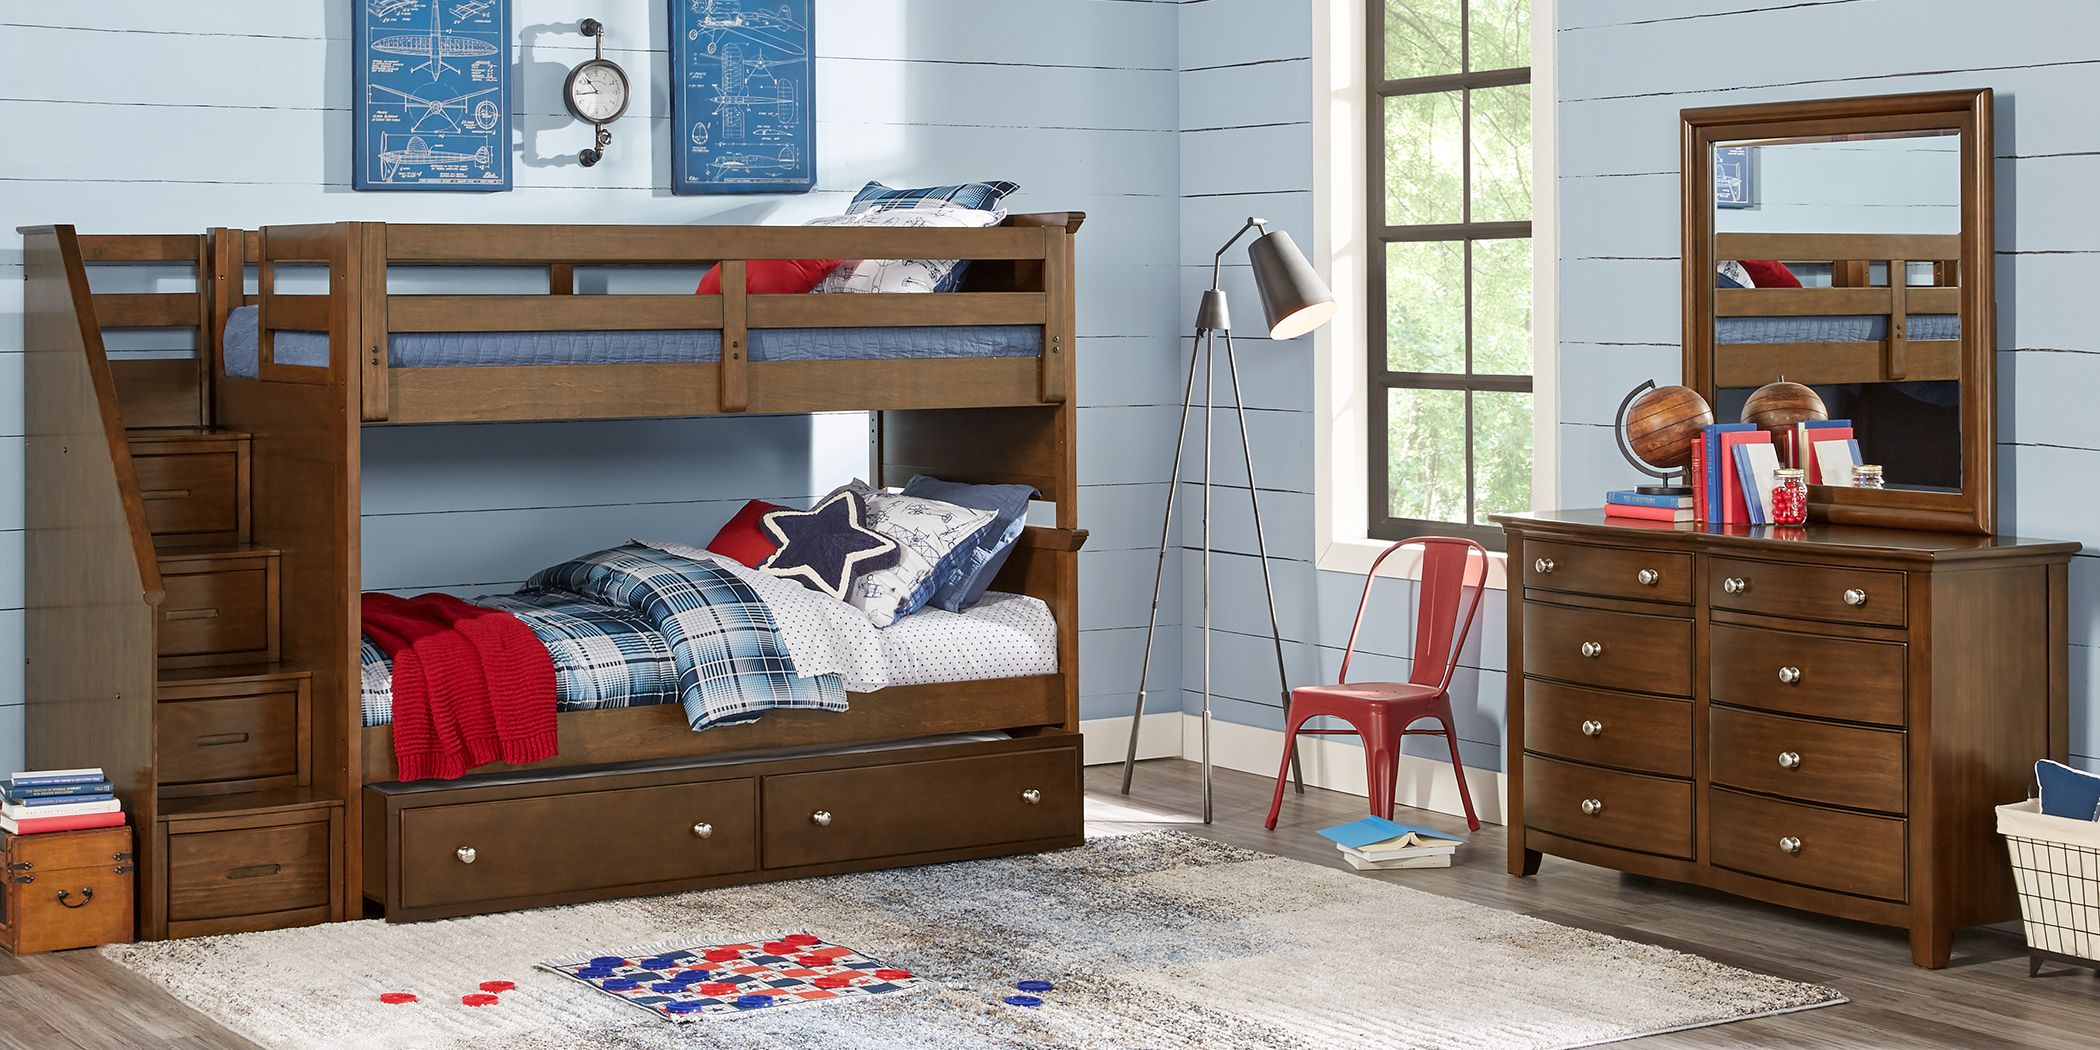 rooms to go boys bedroom sets